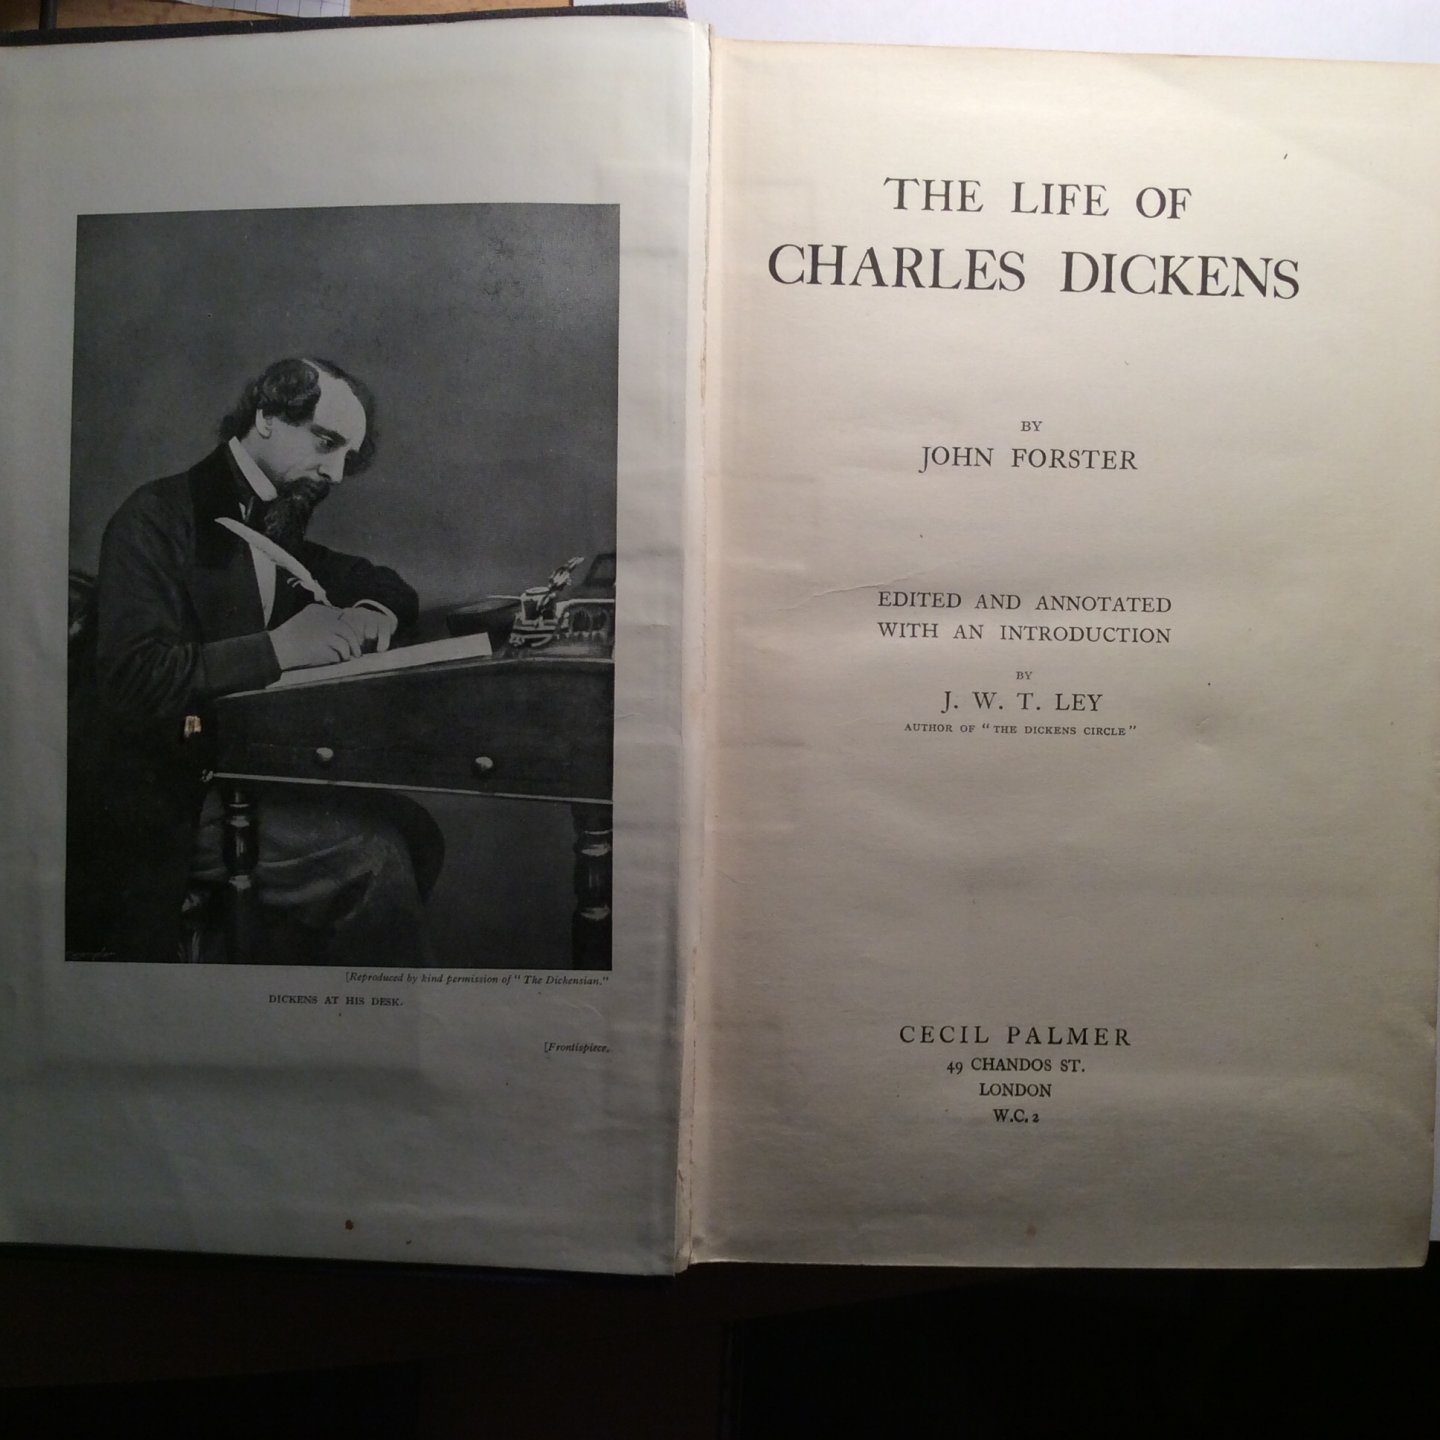 Forster, John - The life of Charles Dickens